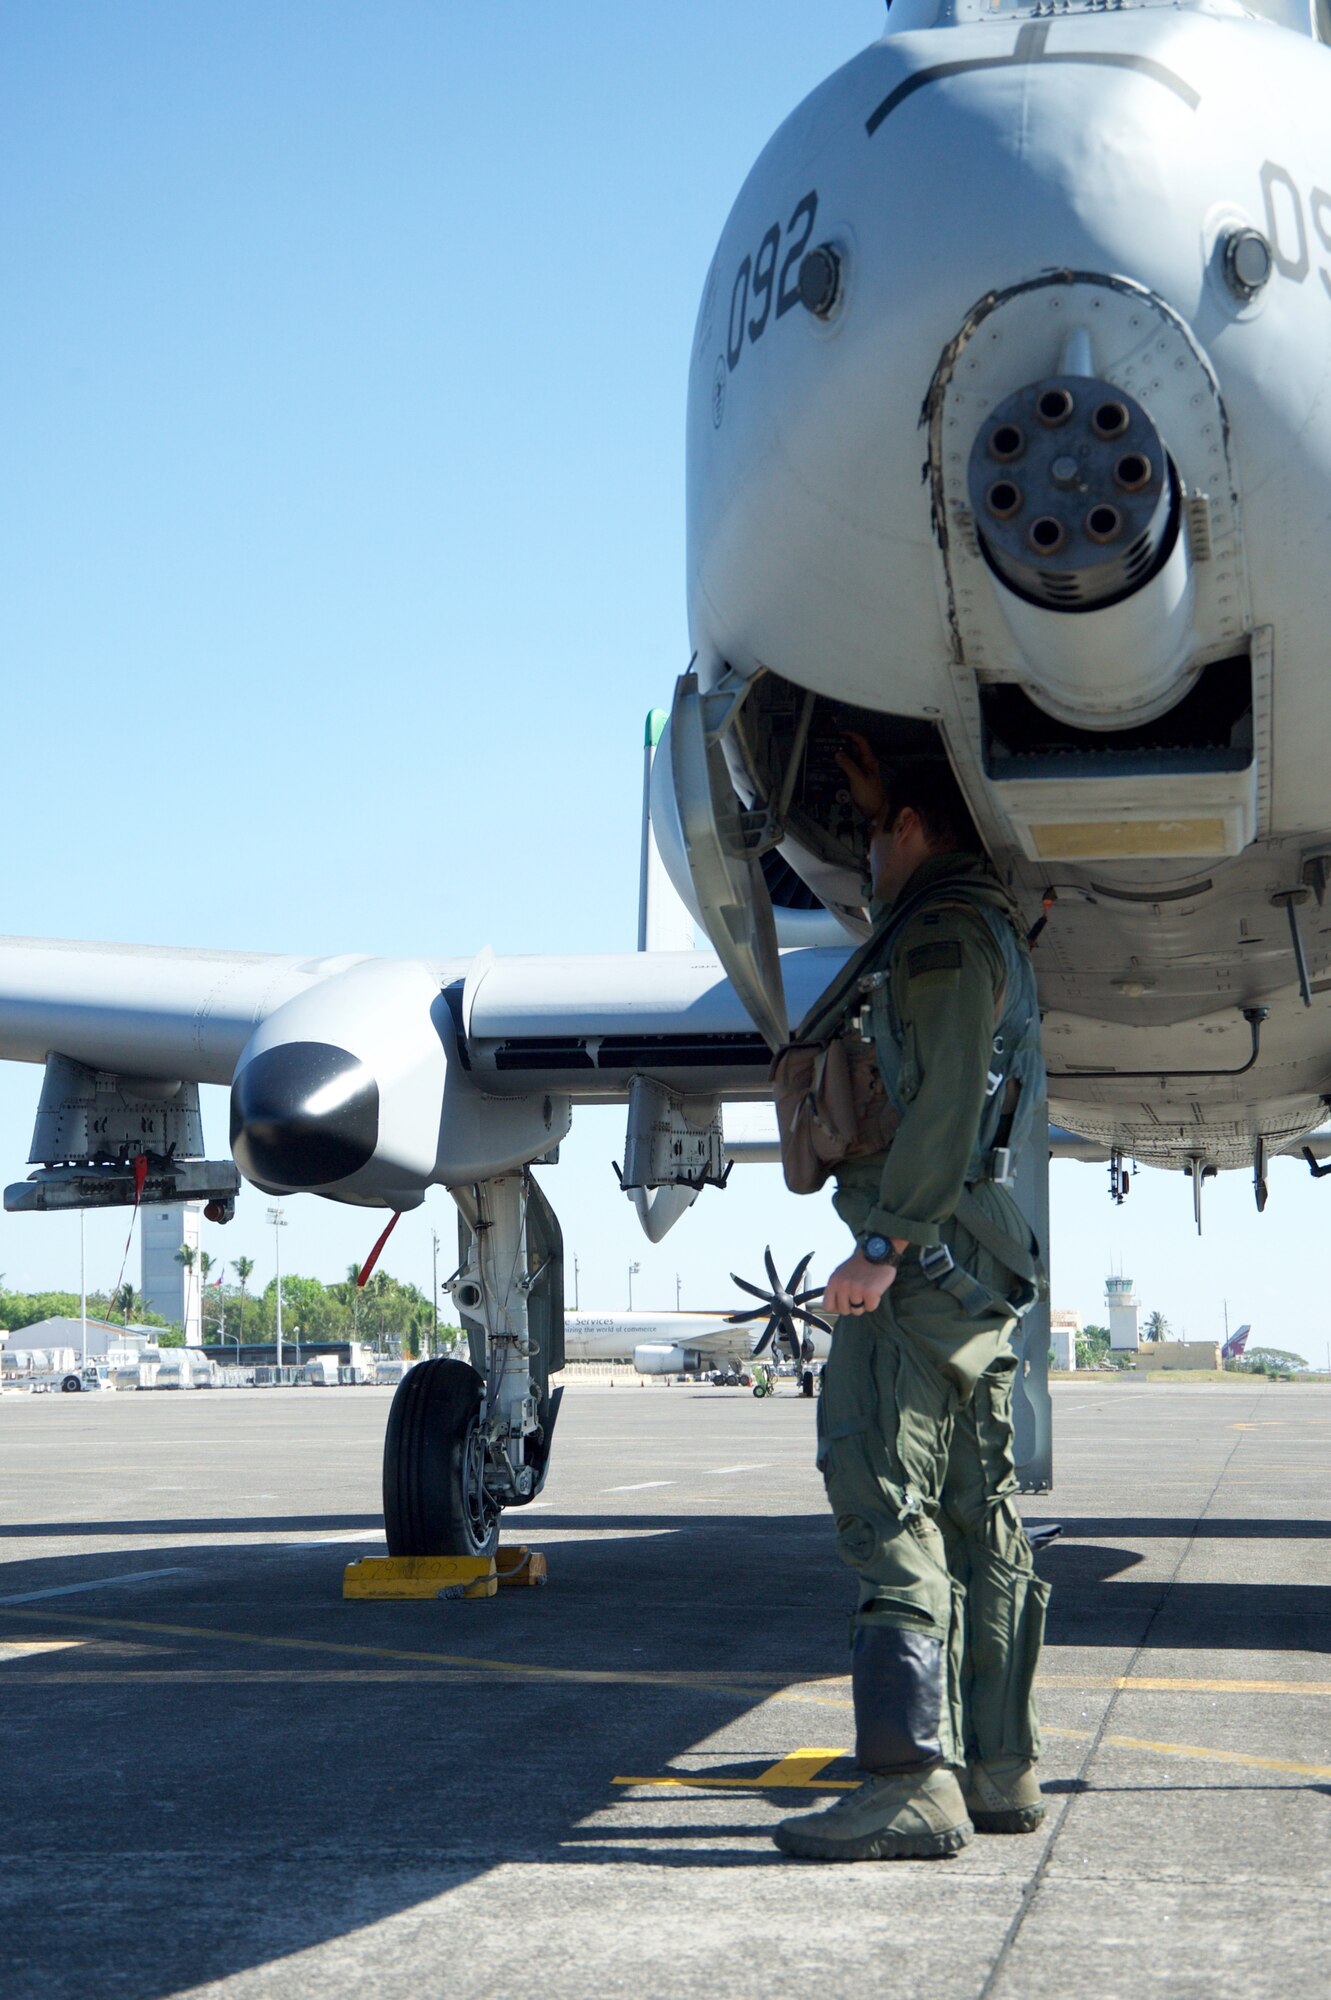 U.S. Air Force Capt. John Meyers conducts a pre-flight check on an A-10C Thunderbolt II aircraft at Clark Air Base, Philippines, before flying a maritime domain awareness mission over international waters west of the Philippines April 21, 2016. Meyers, along with five A-10Cs, three HH-60G Pave Hawks and 200 Airmen are deployed as part of U.S. Pacific Command’s first Air Contingent. The stand up of the Air Contingent at the invitation of the Philippine government is just one way the U.S. exercises continued presence and commitment to partners and allies in the region. (U.S. Air Force photo by Capt. Susan Harrington)